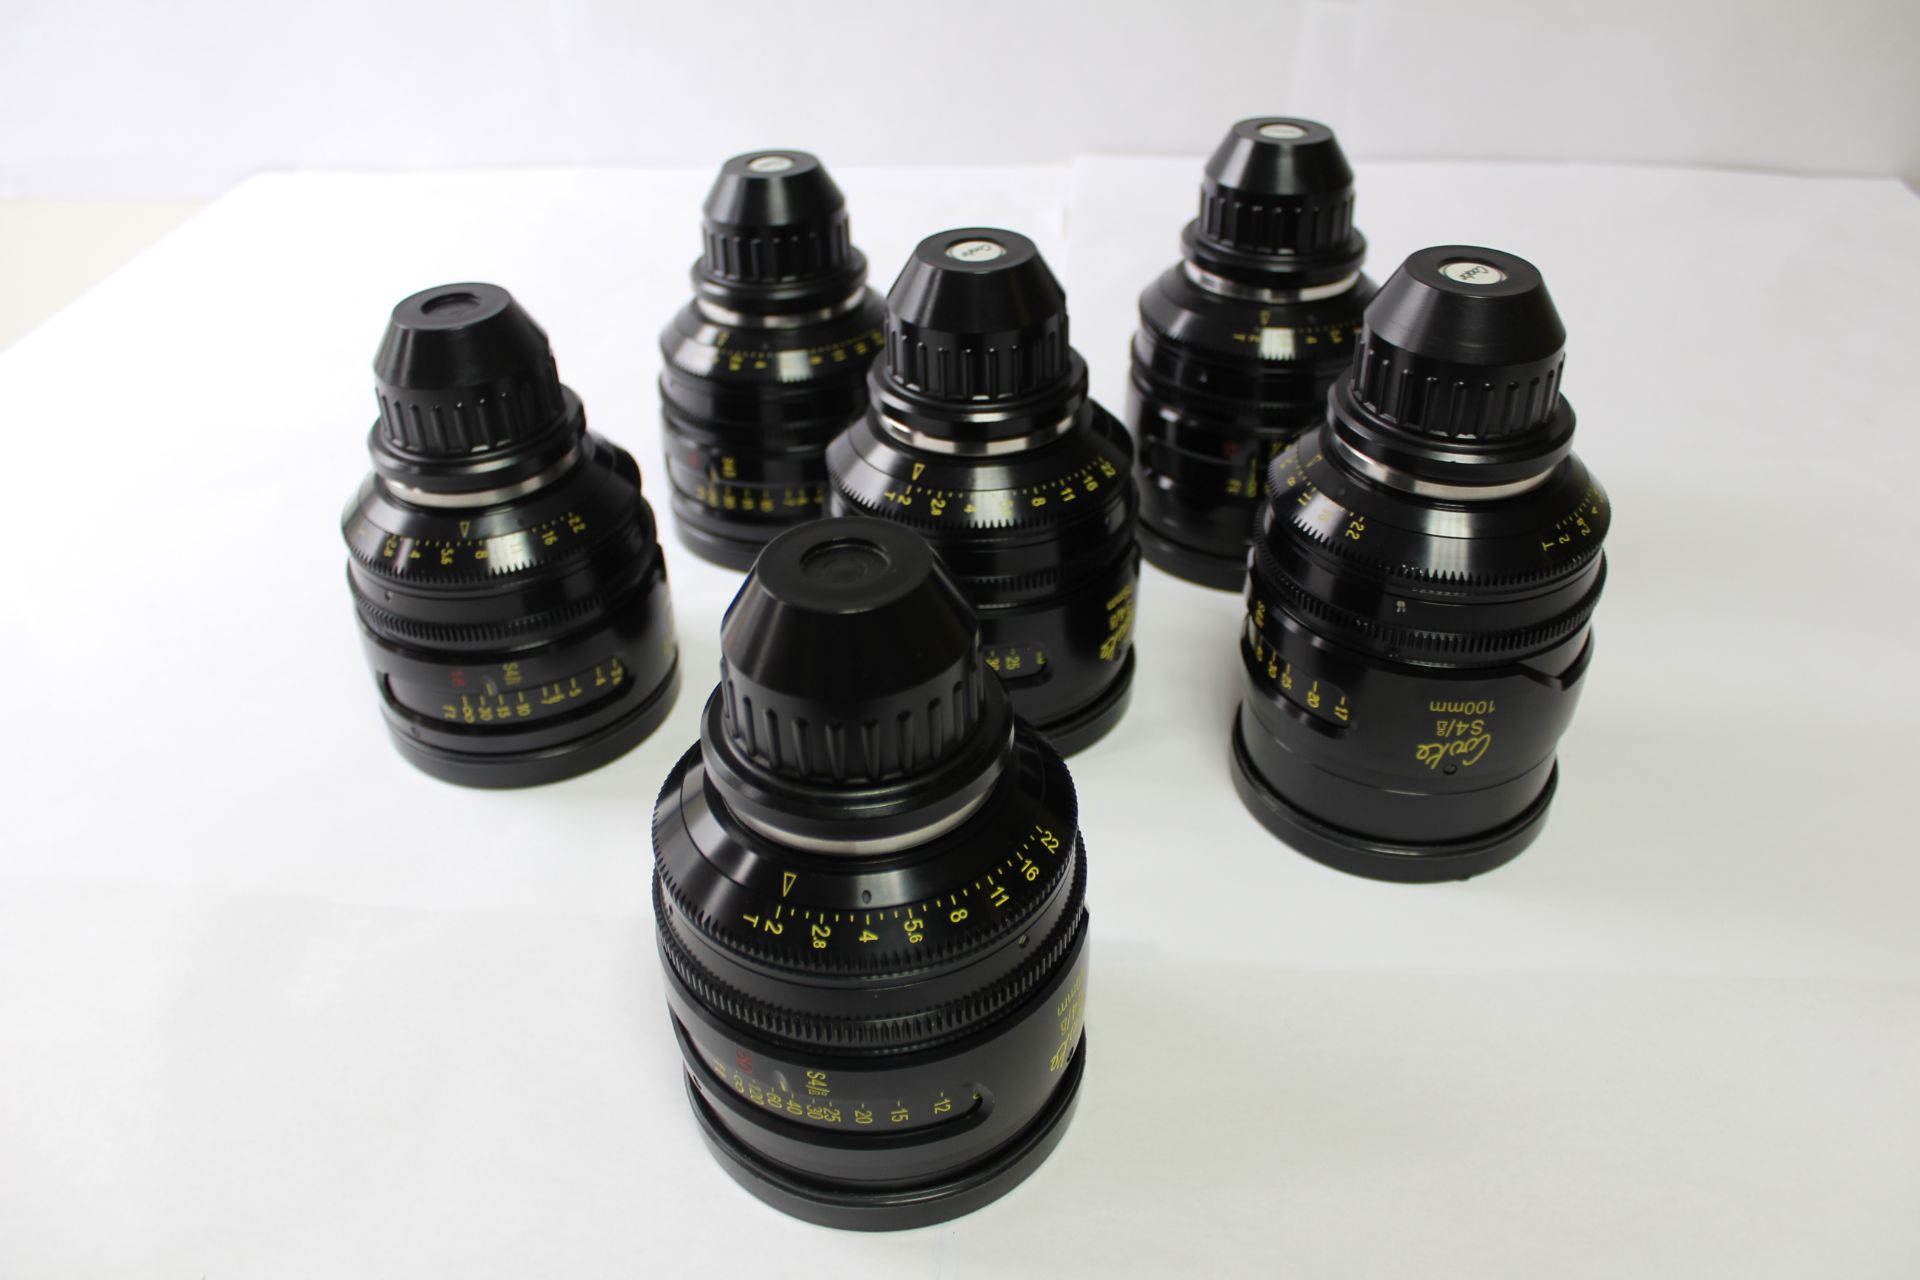 Cooke S4/i Prime Lens set of 6 Consisting of 100mm, 75mm, 50mm, 32mm, 25mm and 18mm Prime Lenses w - Image 2 of 2